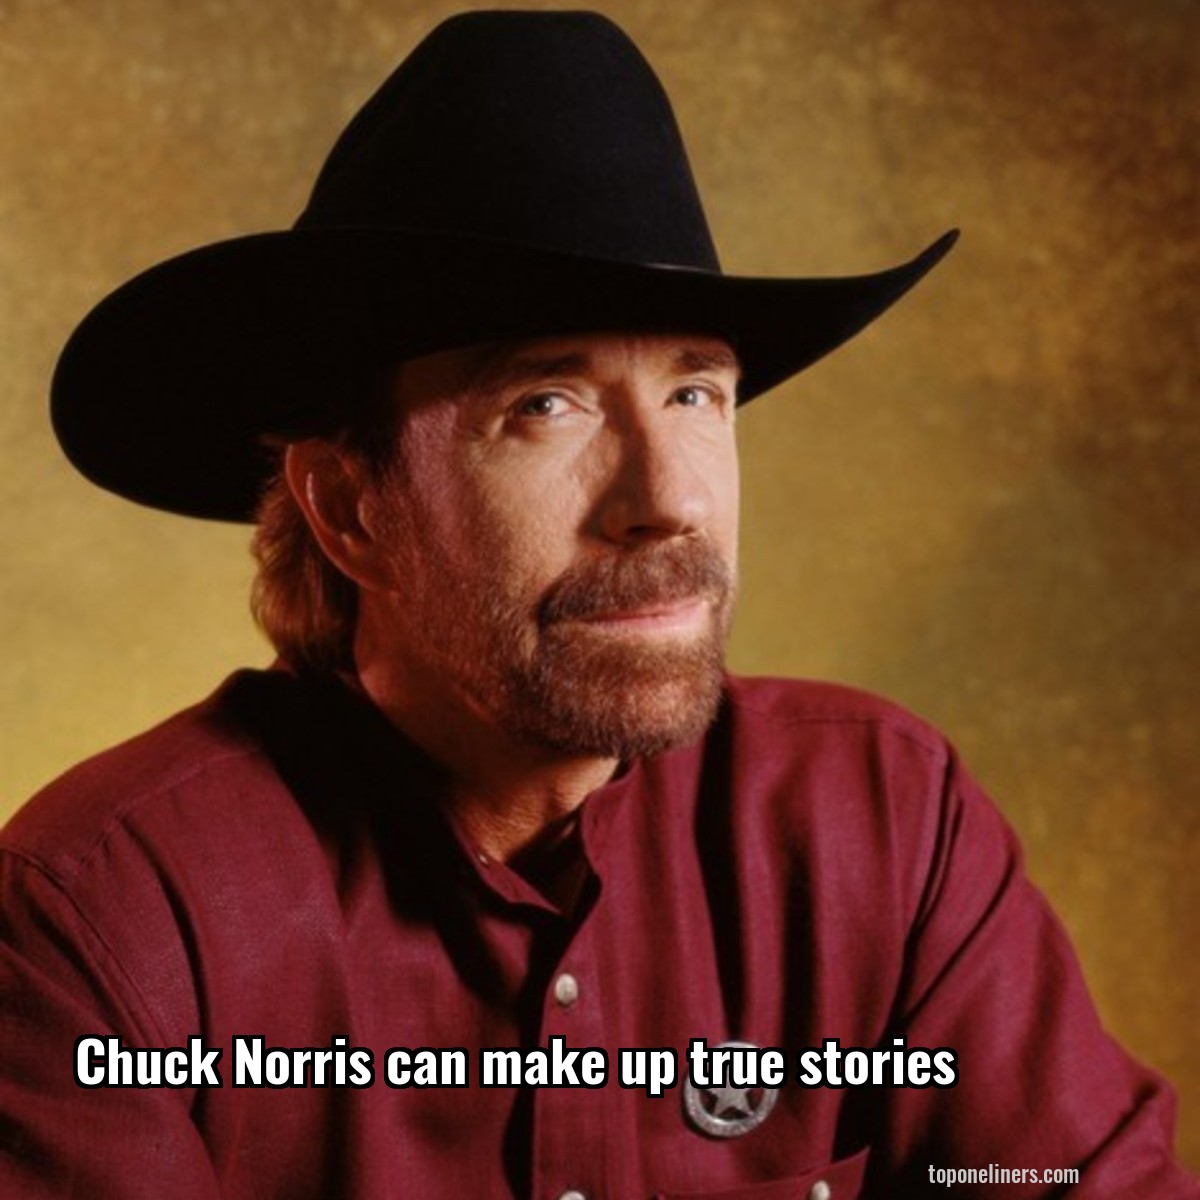 Chuck Norris can make up true stories